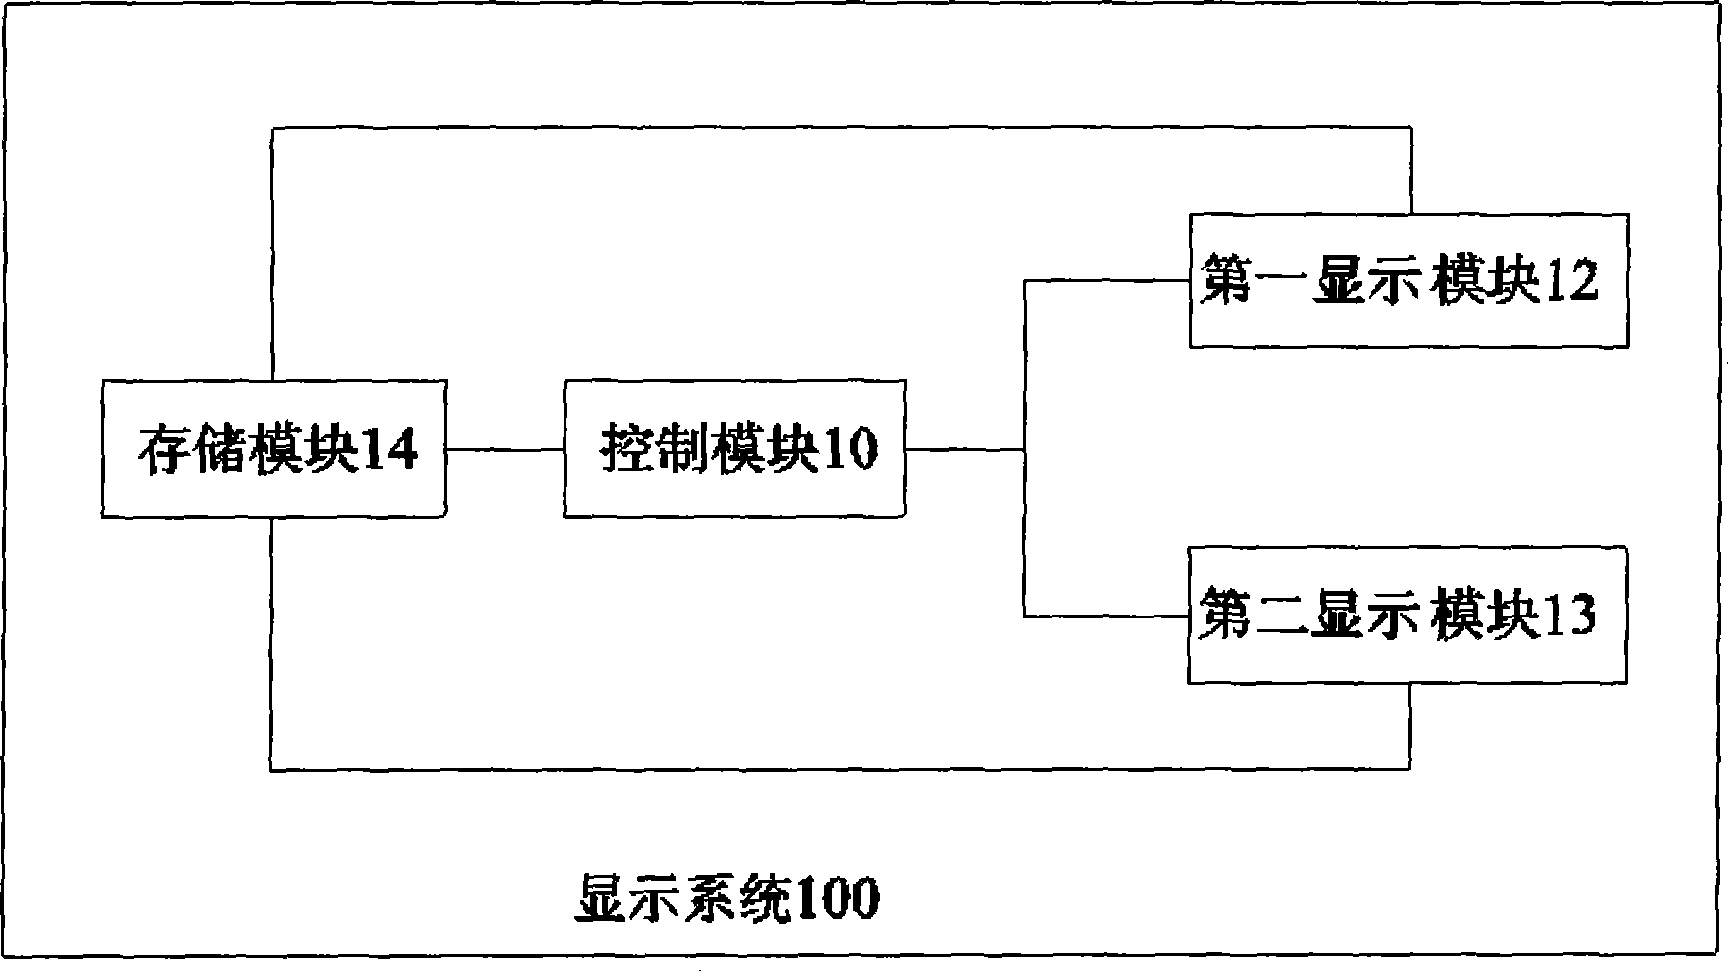 Display system and display device